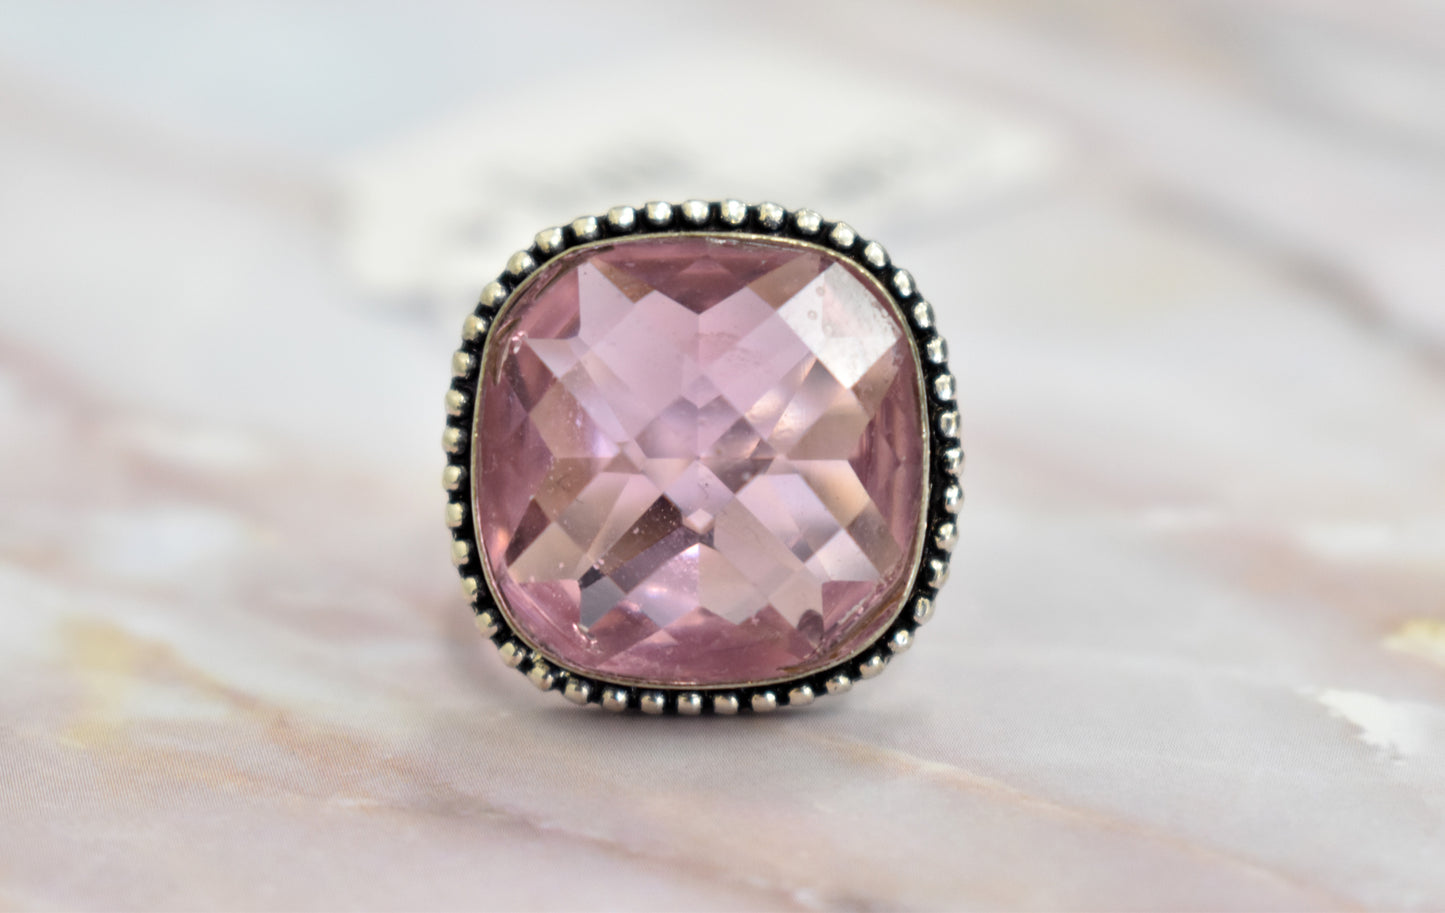 stones-of-transformation - Pink Topaz (Size 7.5) - Stones of Transformation - 